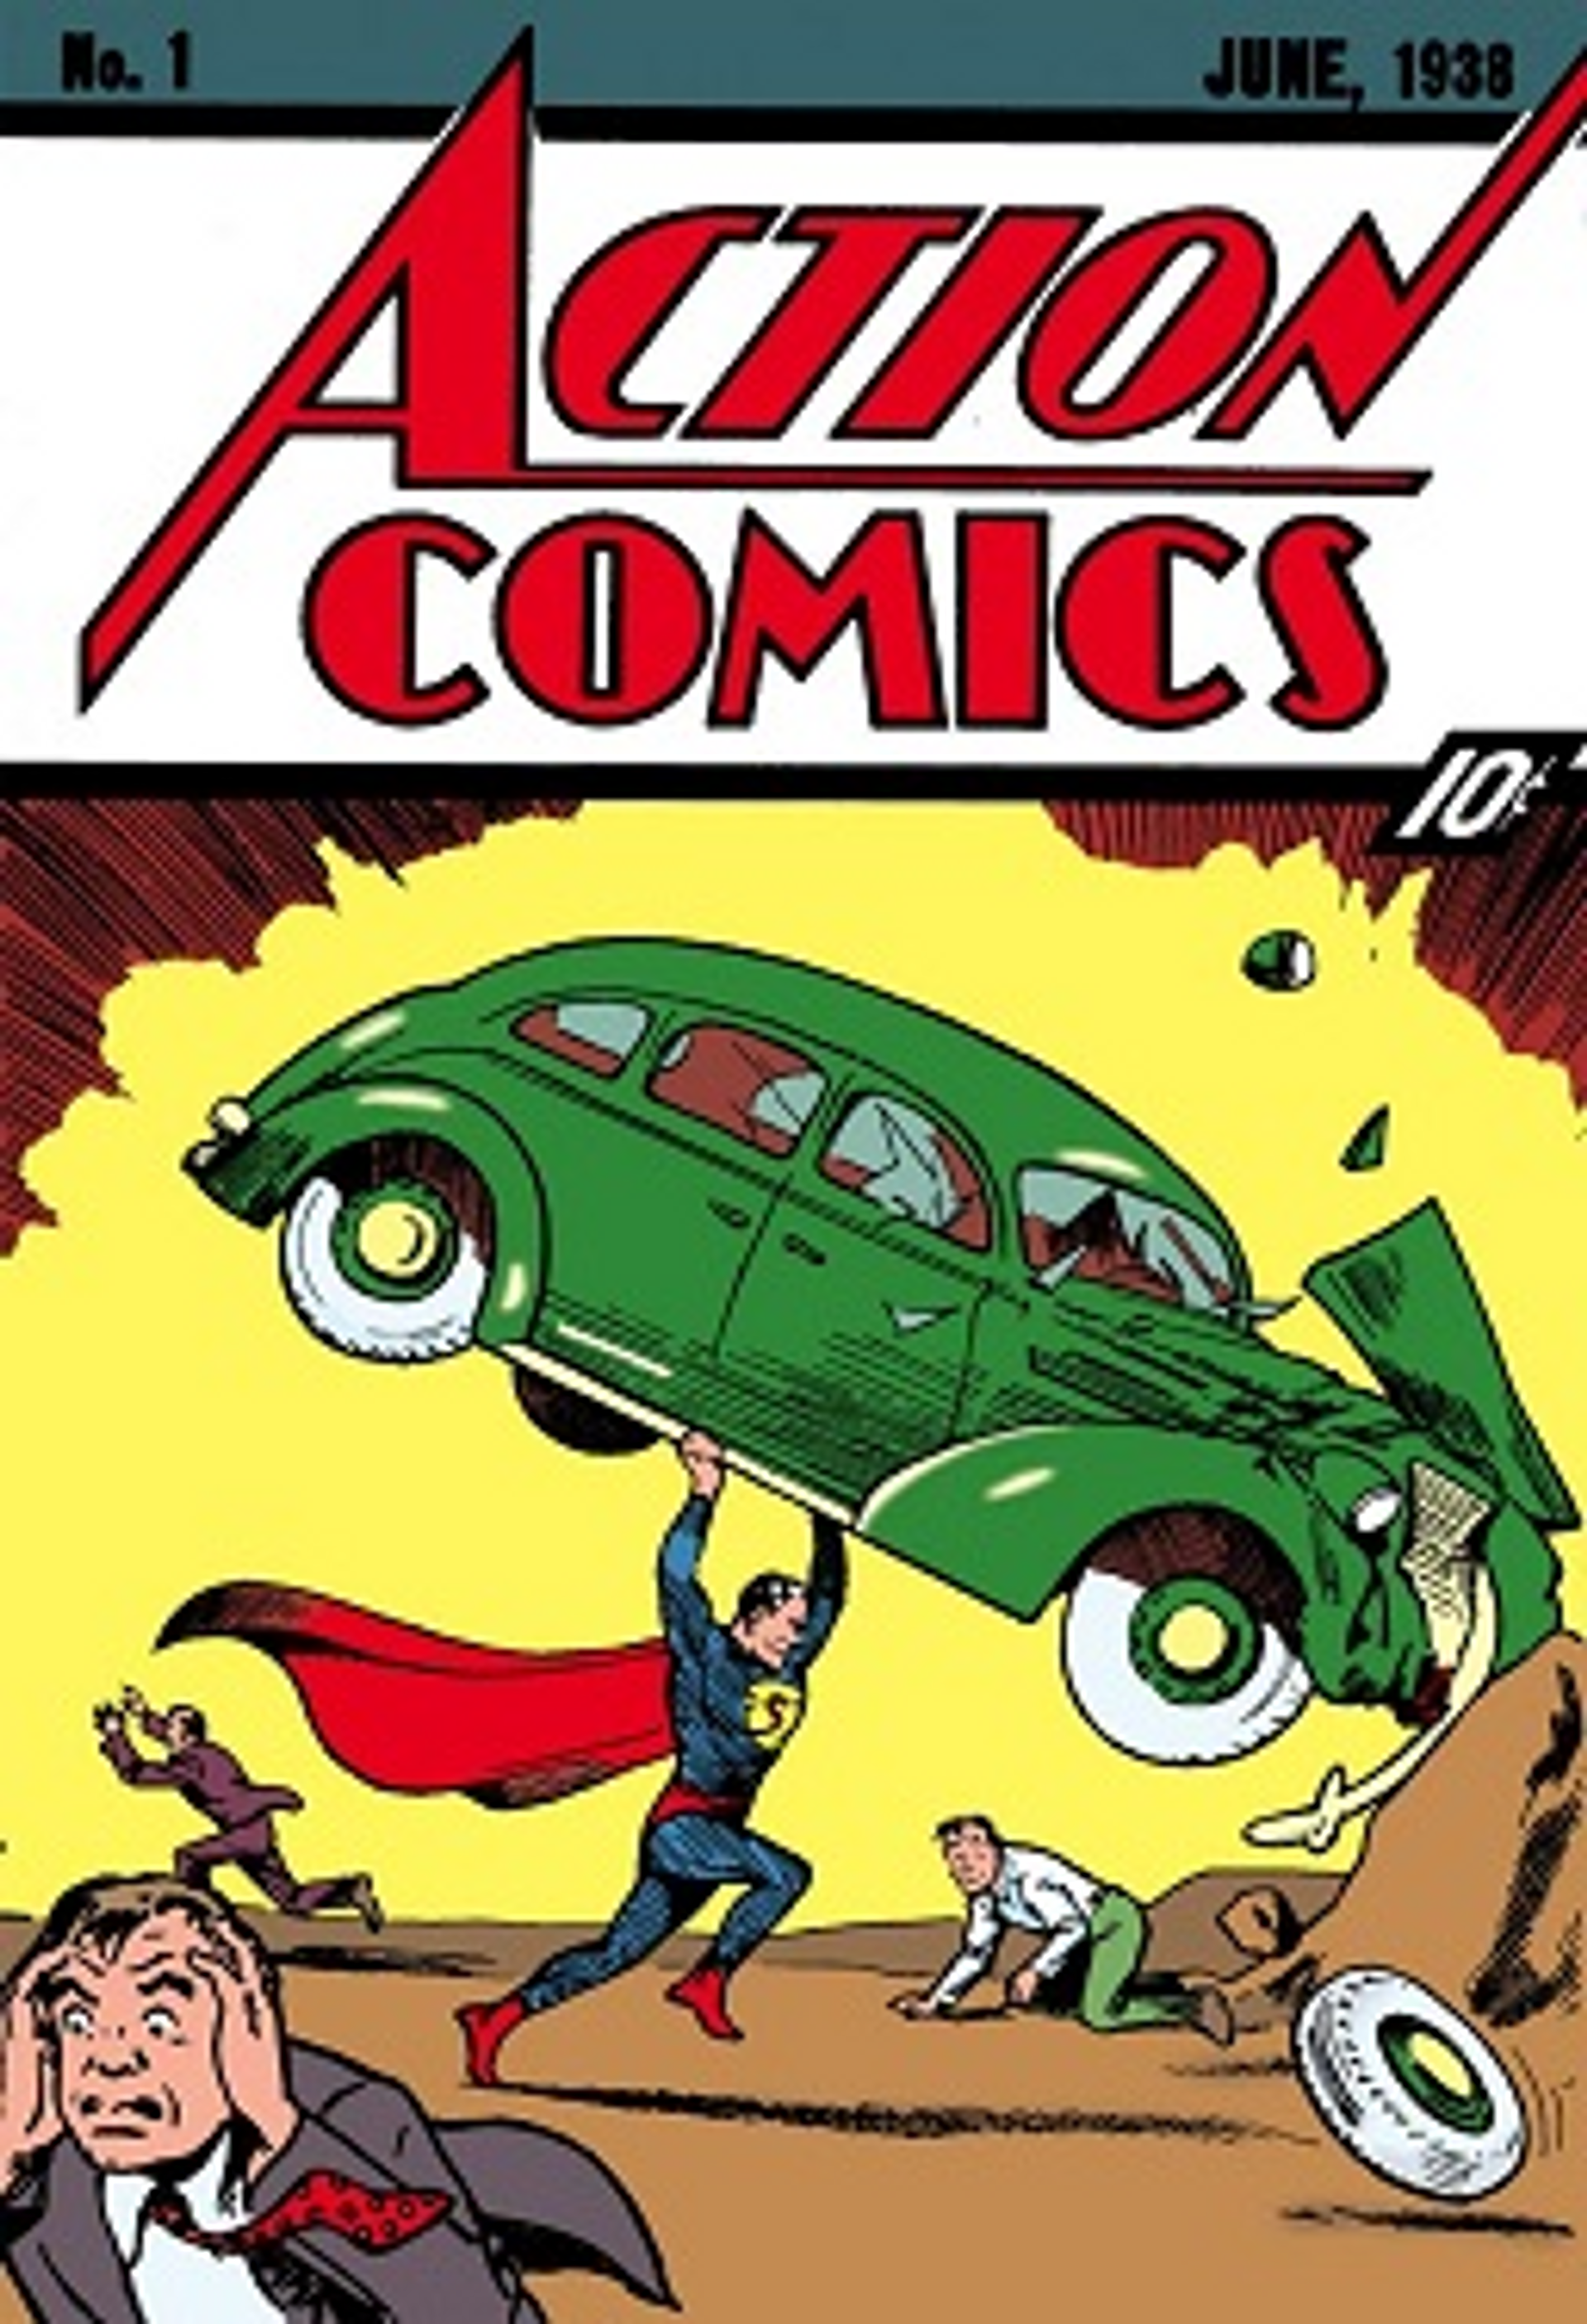 Action Comics #1, featuring the first appearance of American superhero icon Superman. - Sputnik International, 1920, 07.09.2021